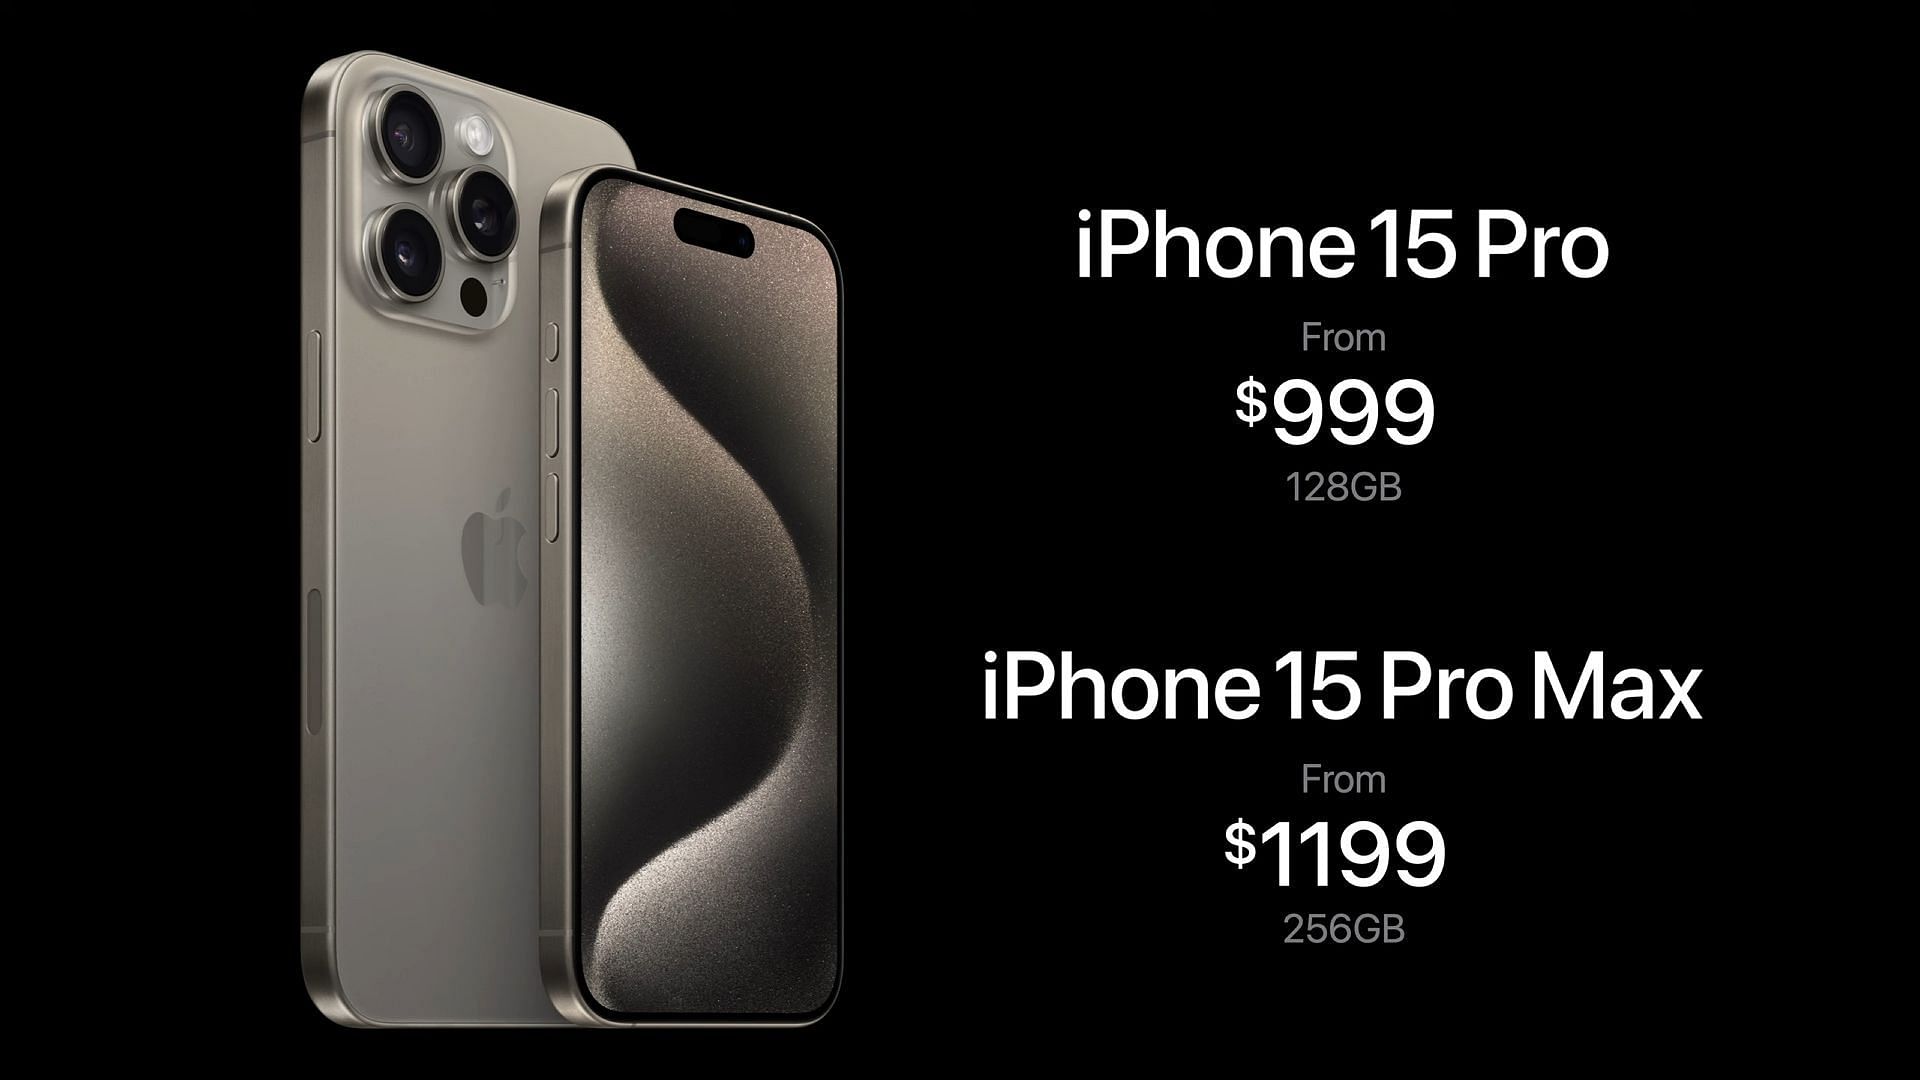 The 15 Pro and iPhone 15 Pro Max will cost $999 and $1199, respectively (Image via Apple)